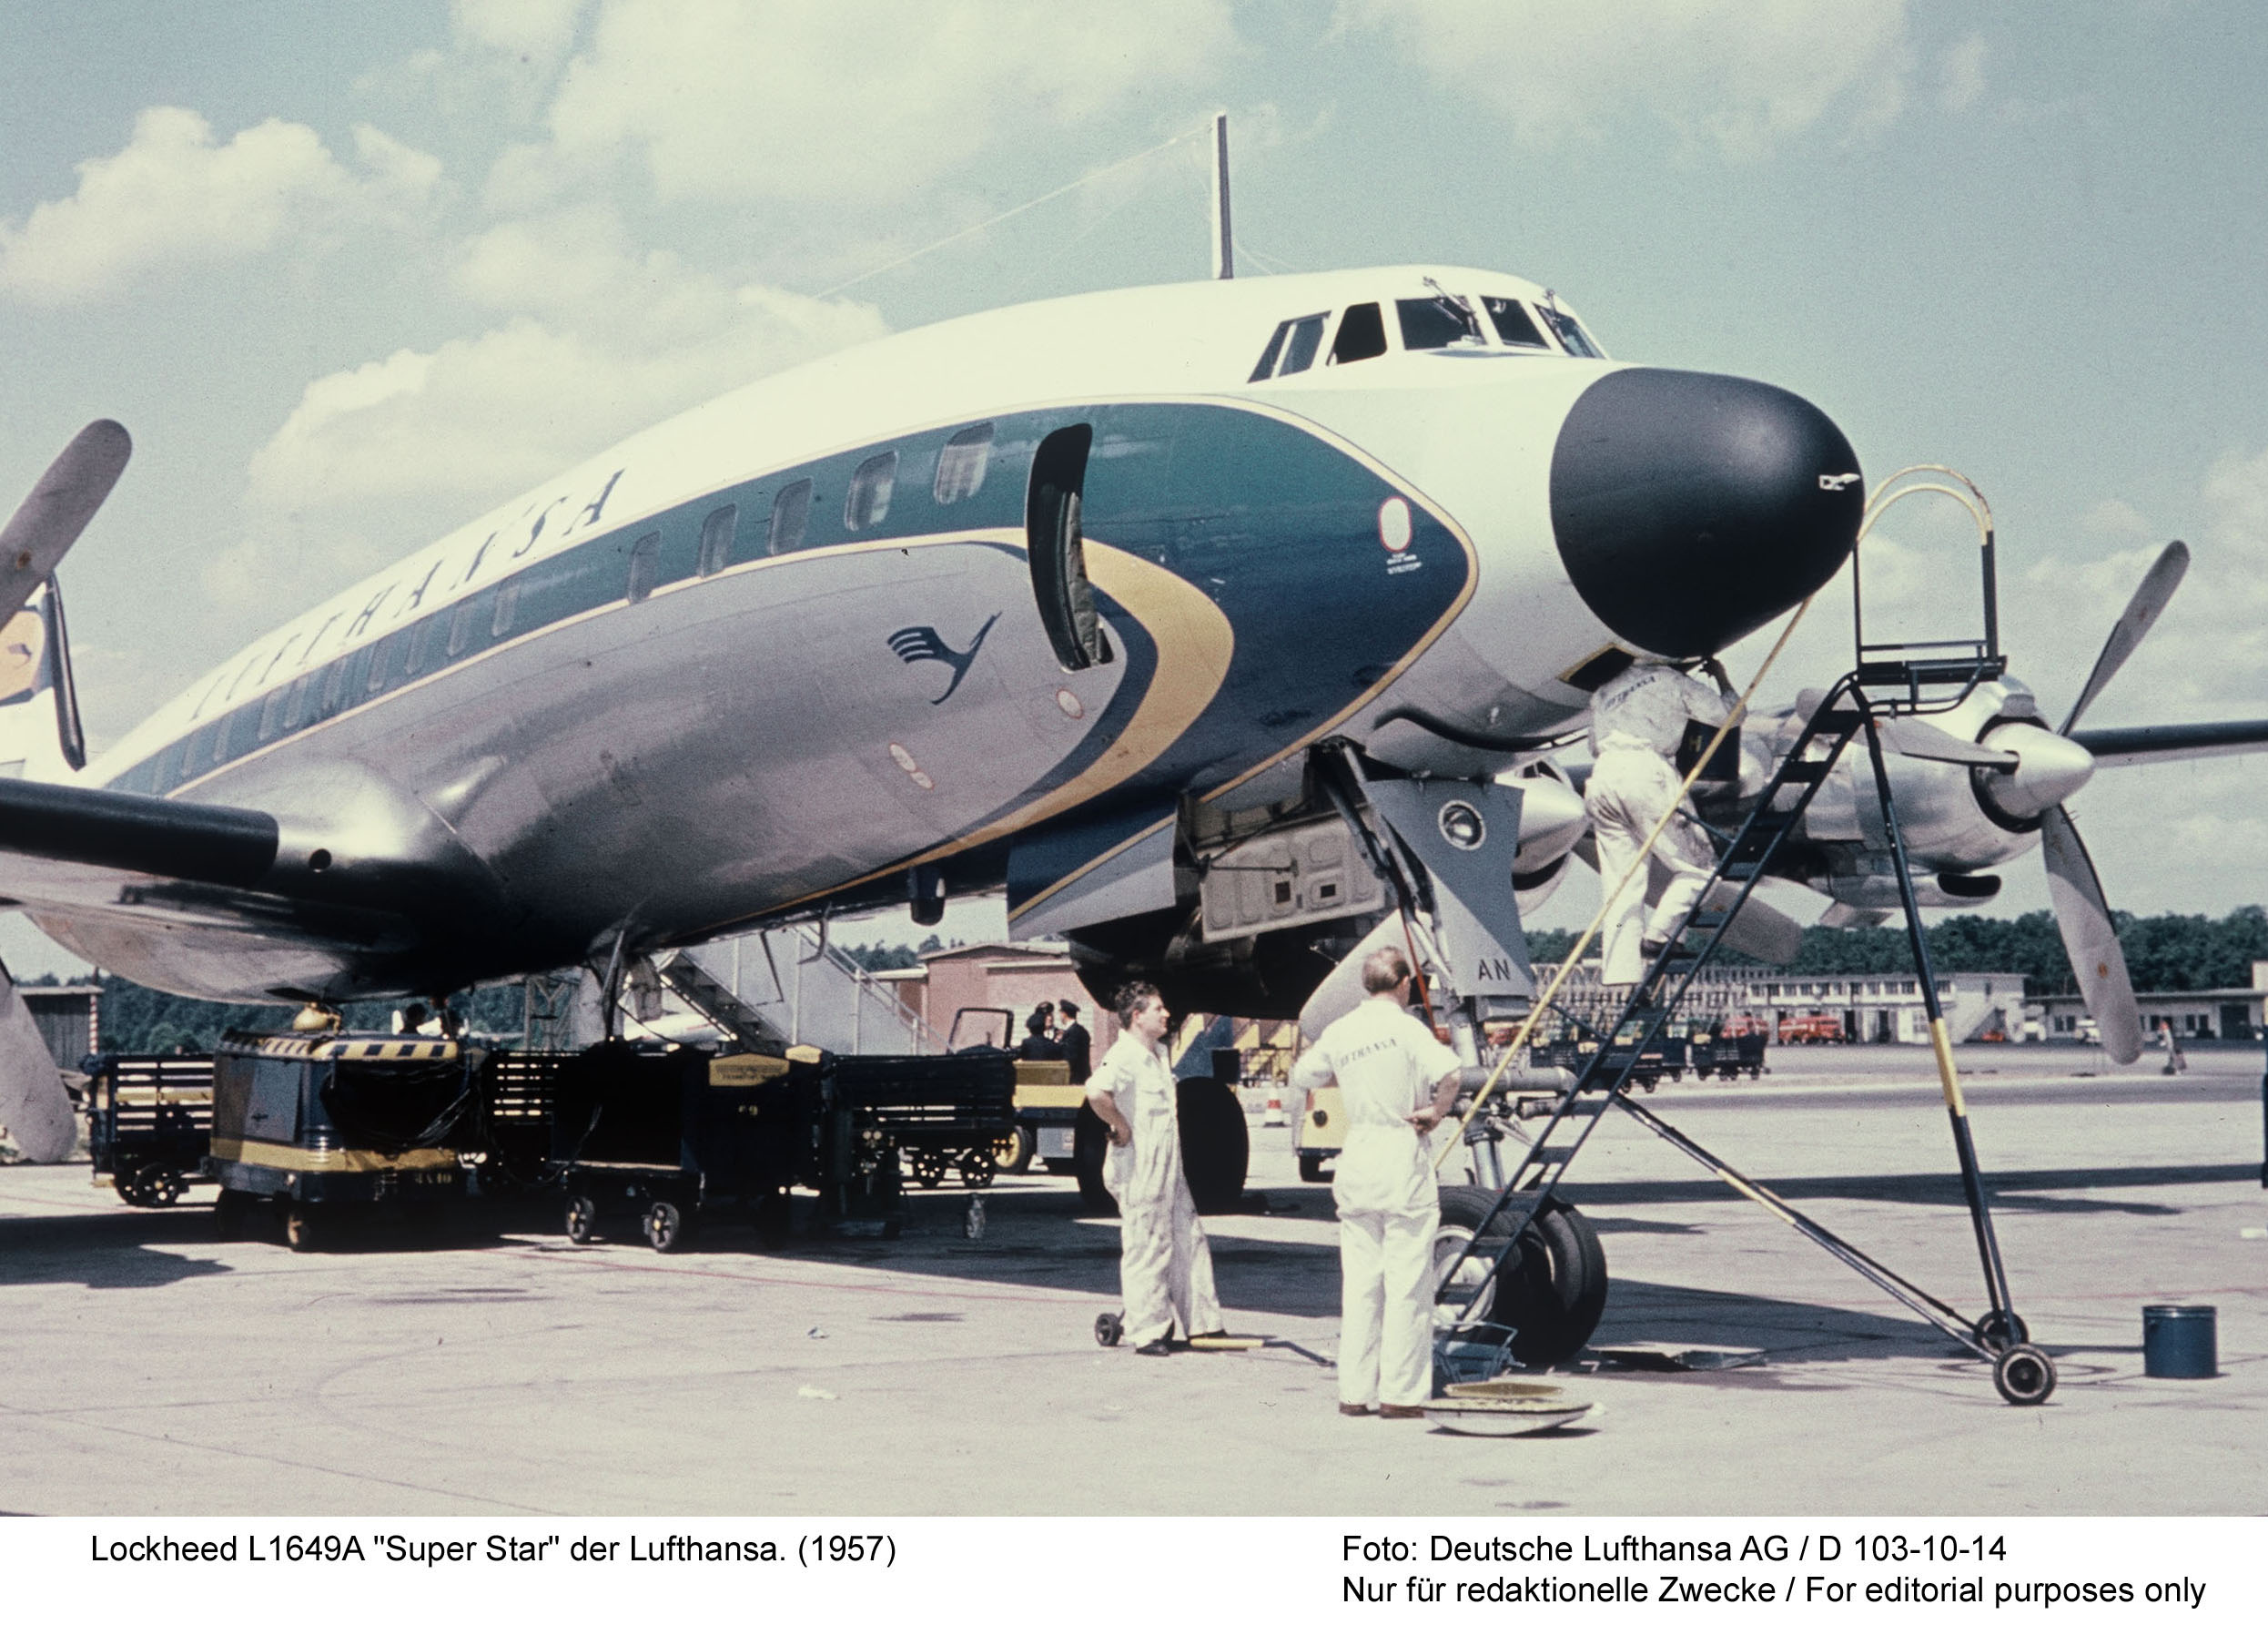 Lockheed L-1649A Super Star during the types introduction with Lufthansa in 1957. (photo via Wolfgang Bormann)